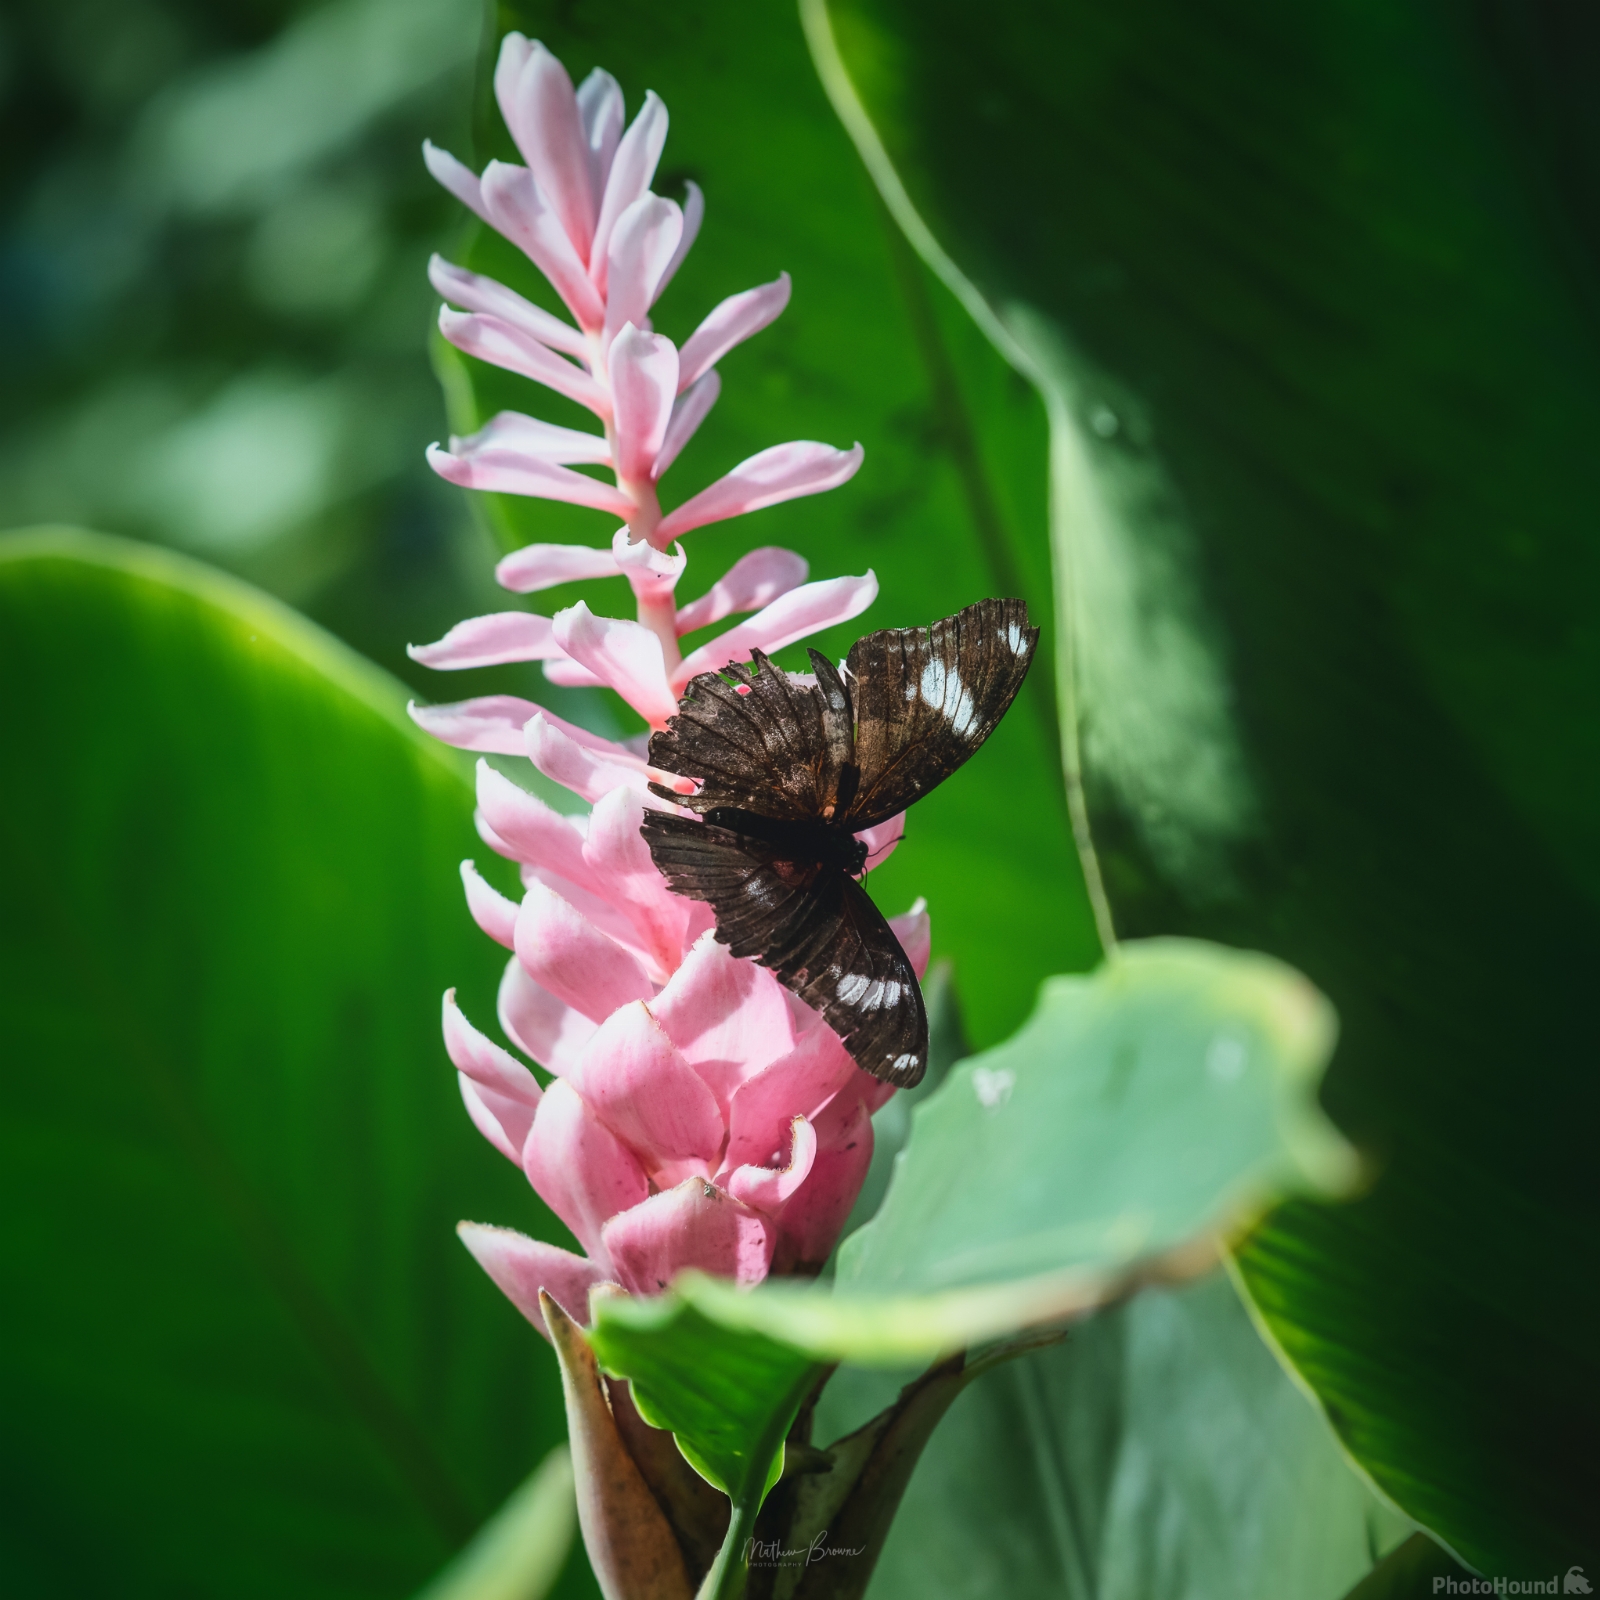 Image of Key West Butterfly and Nature Conservatory by Mathew Browne